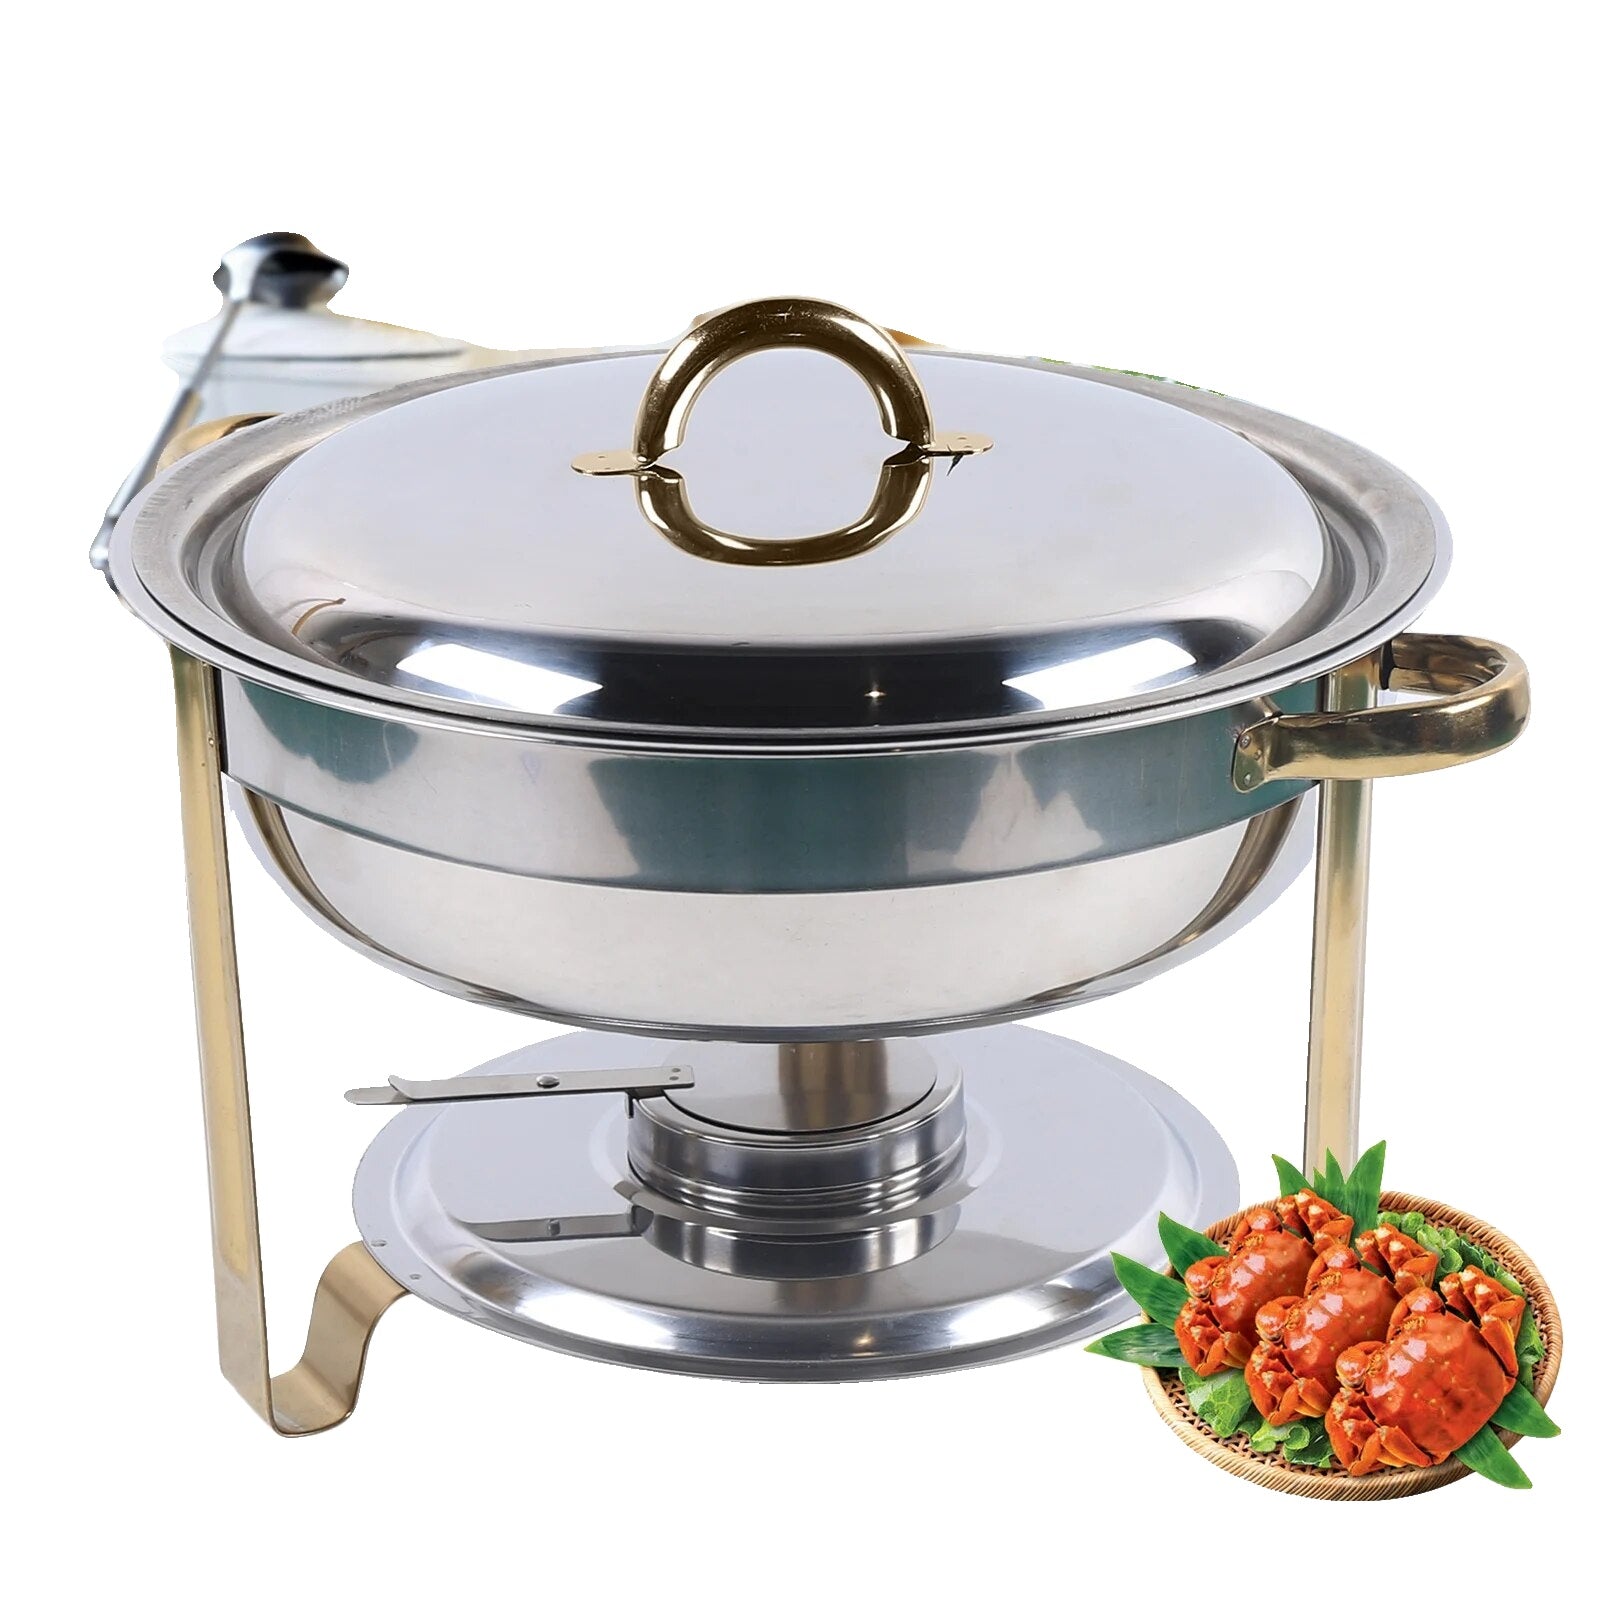 Food Warmer, Stainless Steel, Insulated